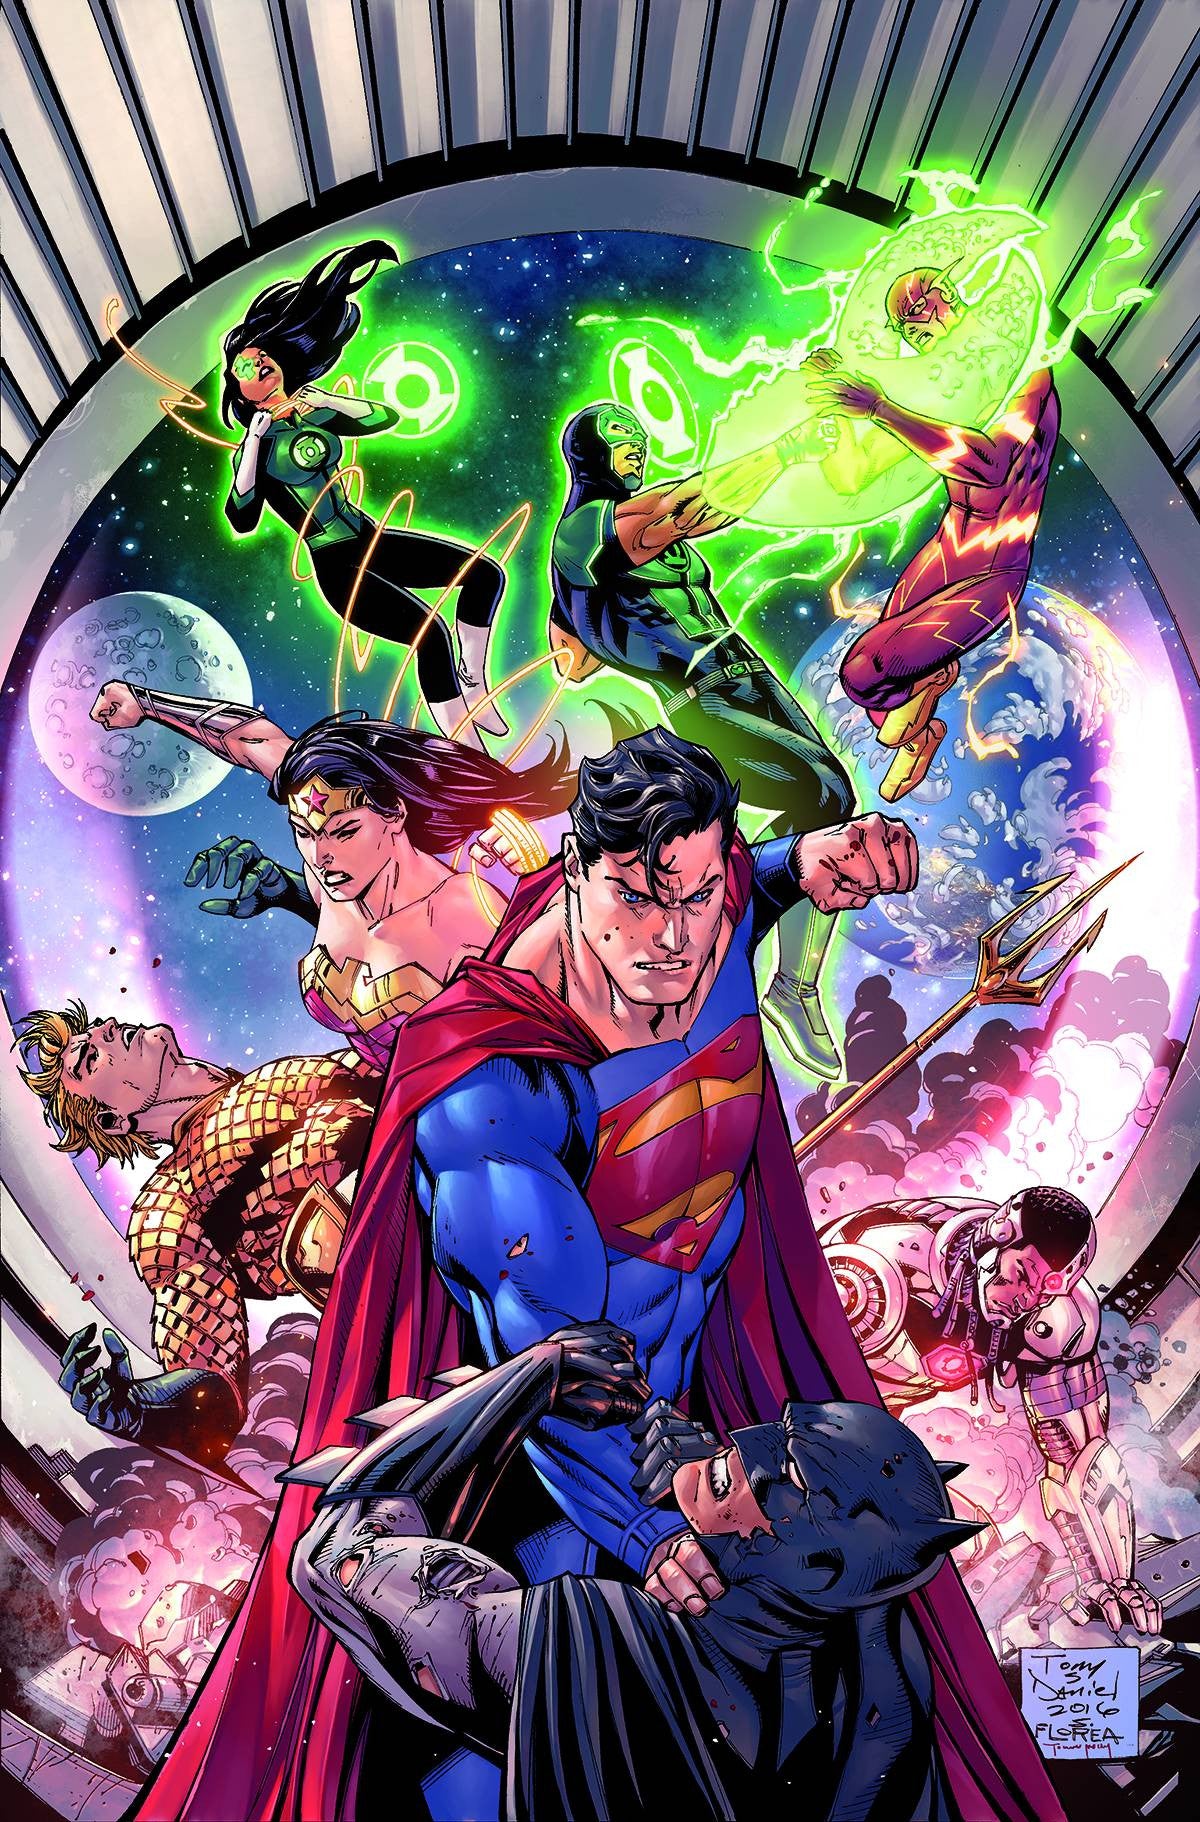 JUSTICE LEAGUE #7 COVER